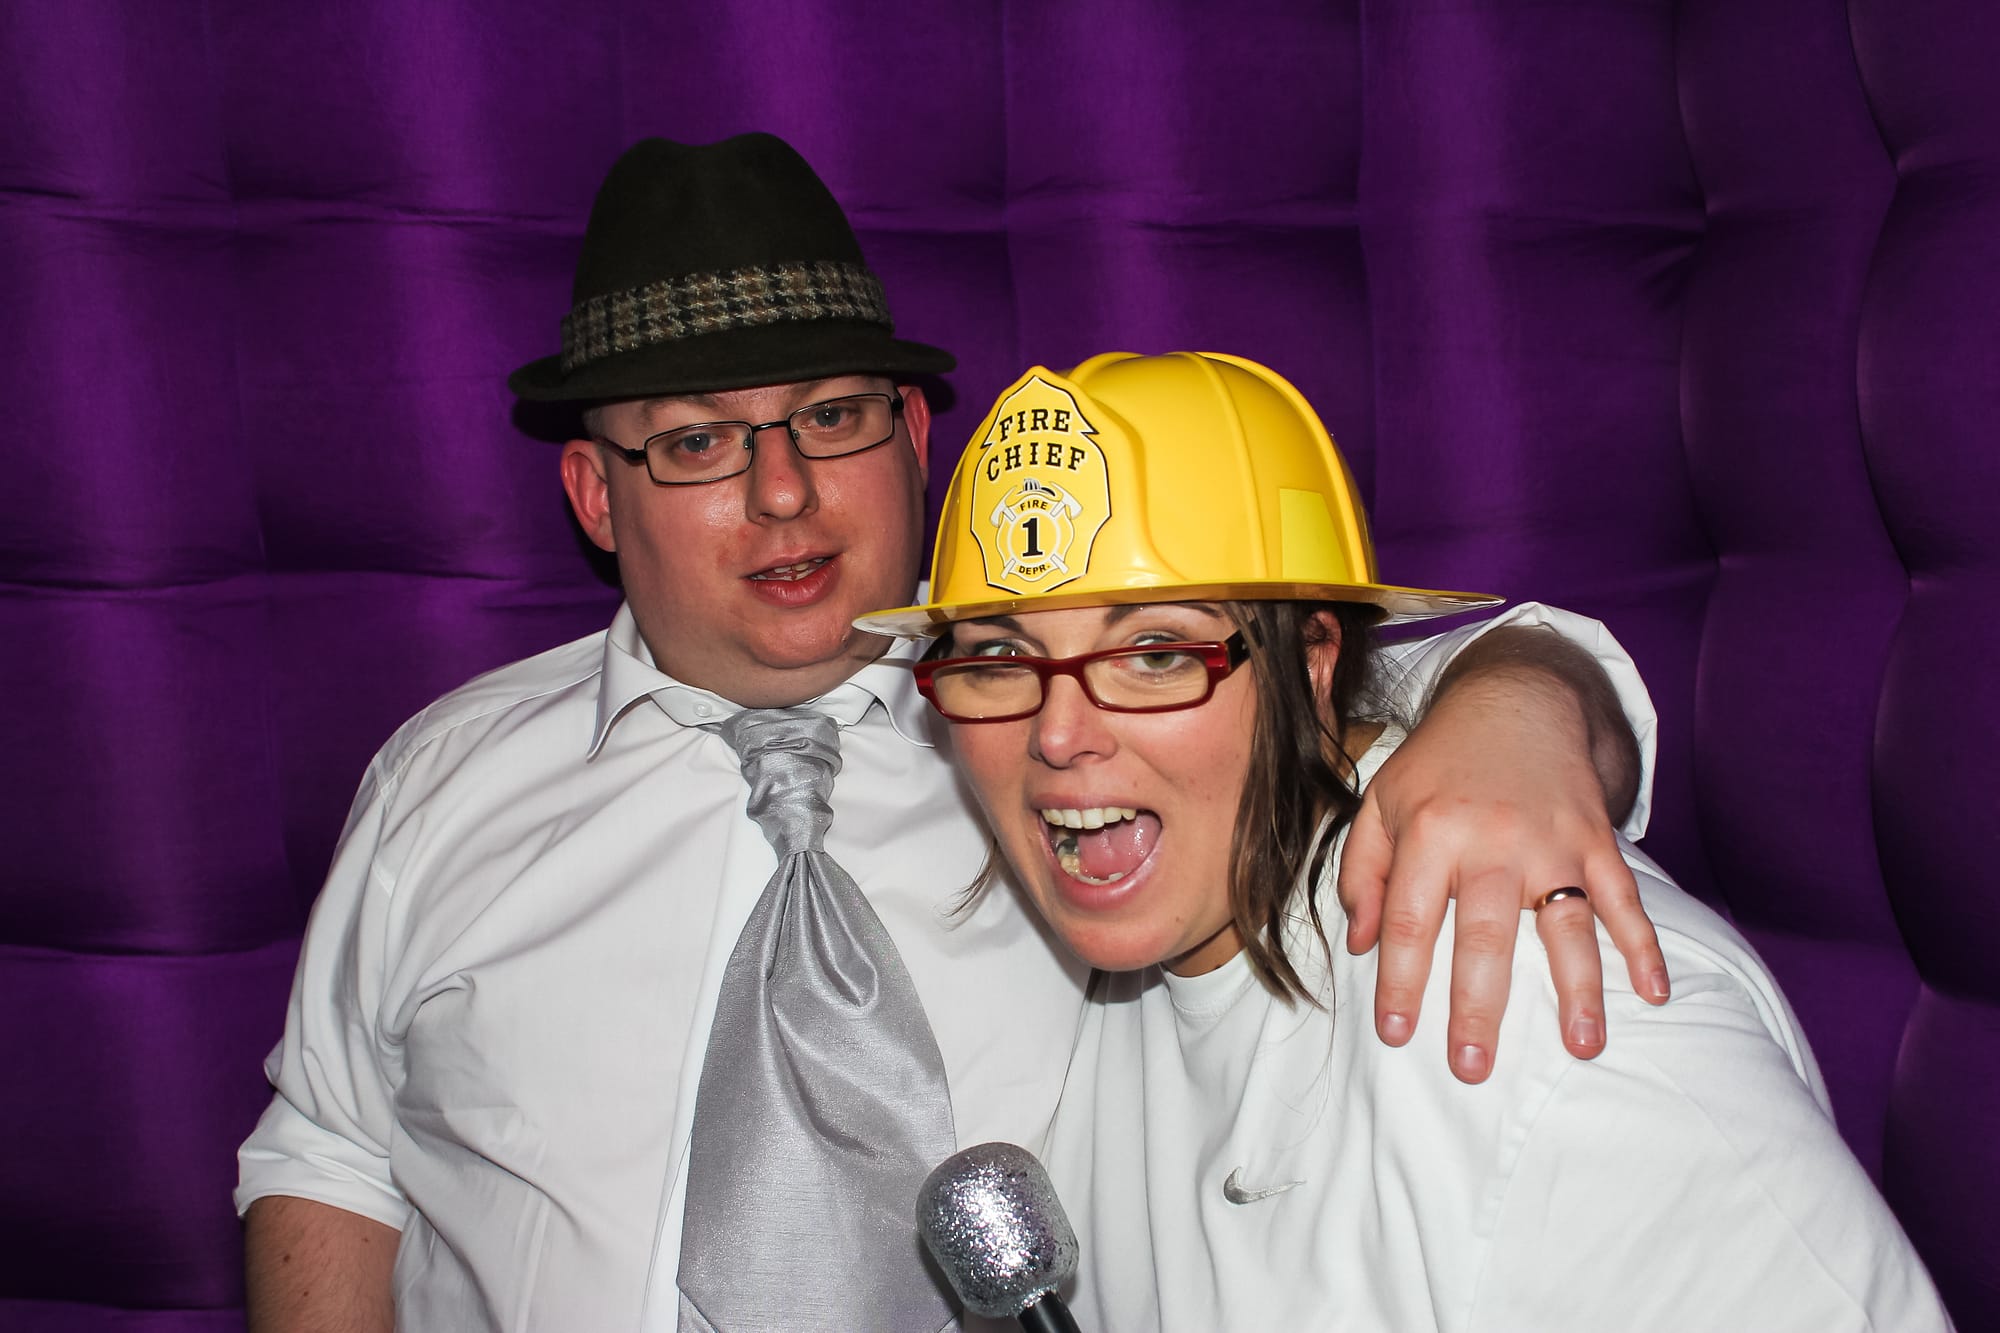 Mr & Mrs McColl wedding Photo booth hire at friars carse